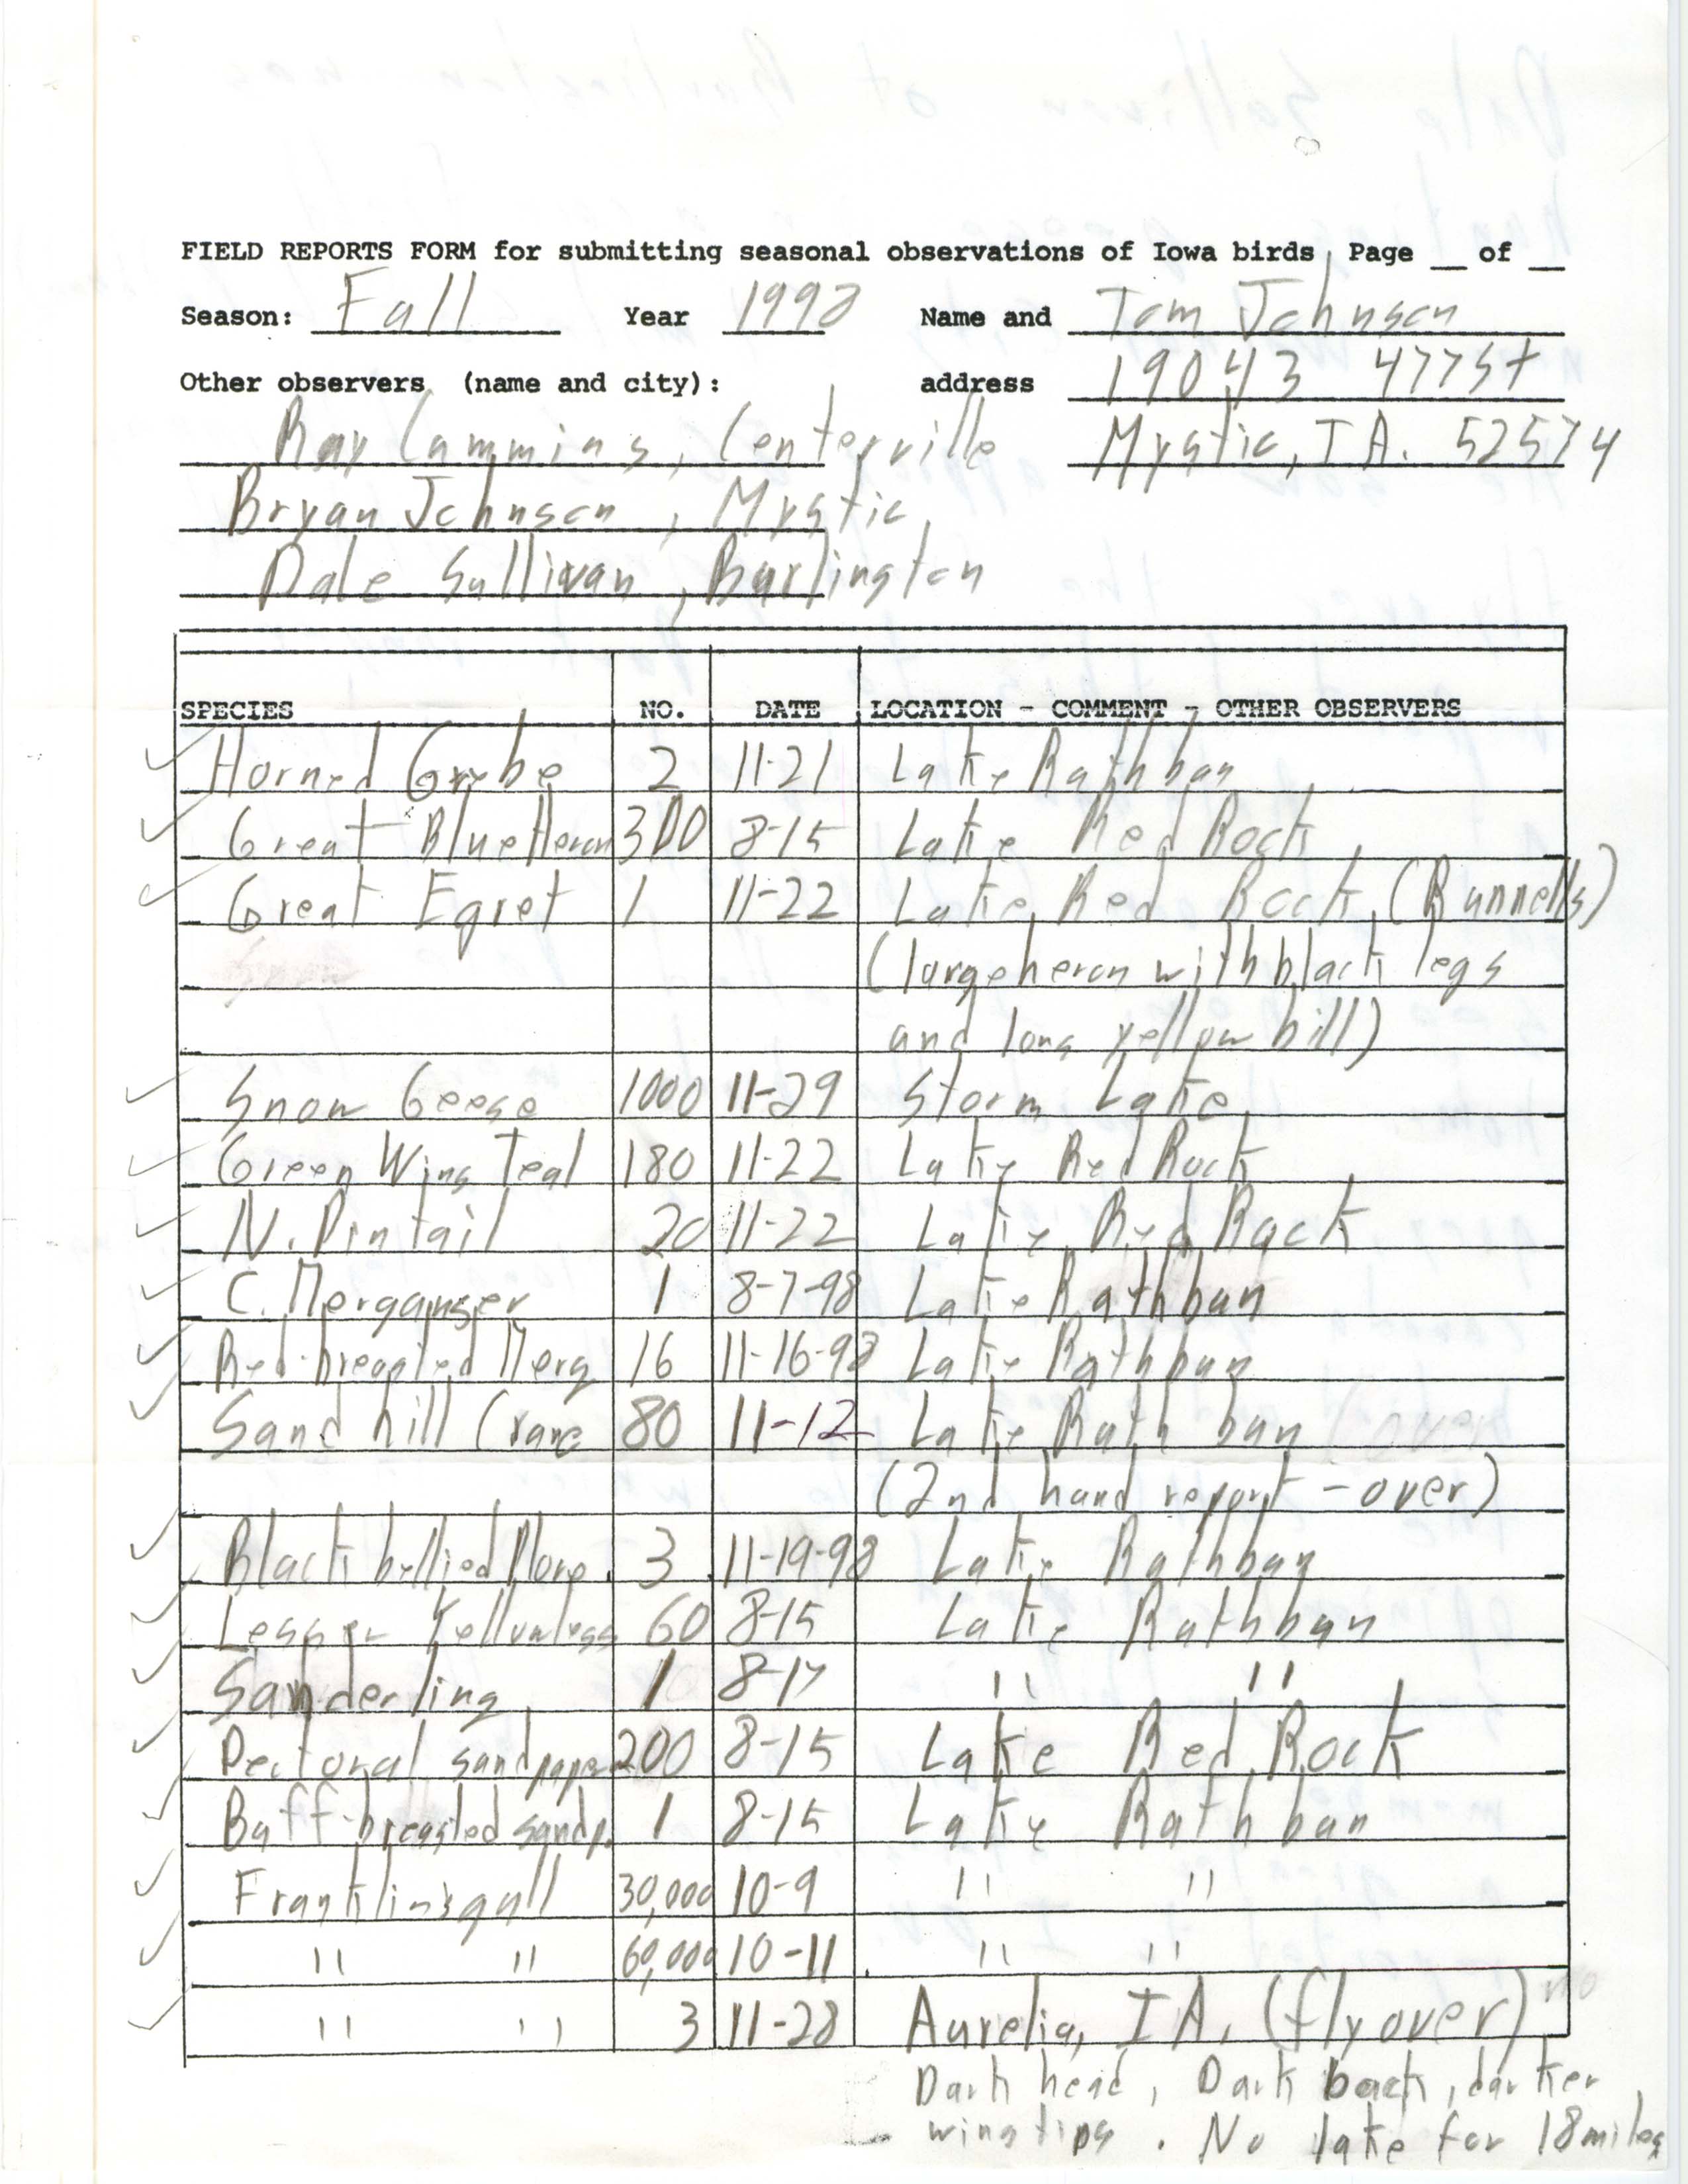 Field reports form for submitting seasonal observations of Iowa birds, Thomas N. Johnson, fall 1998